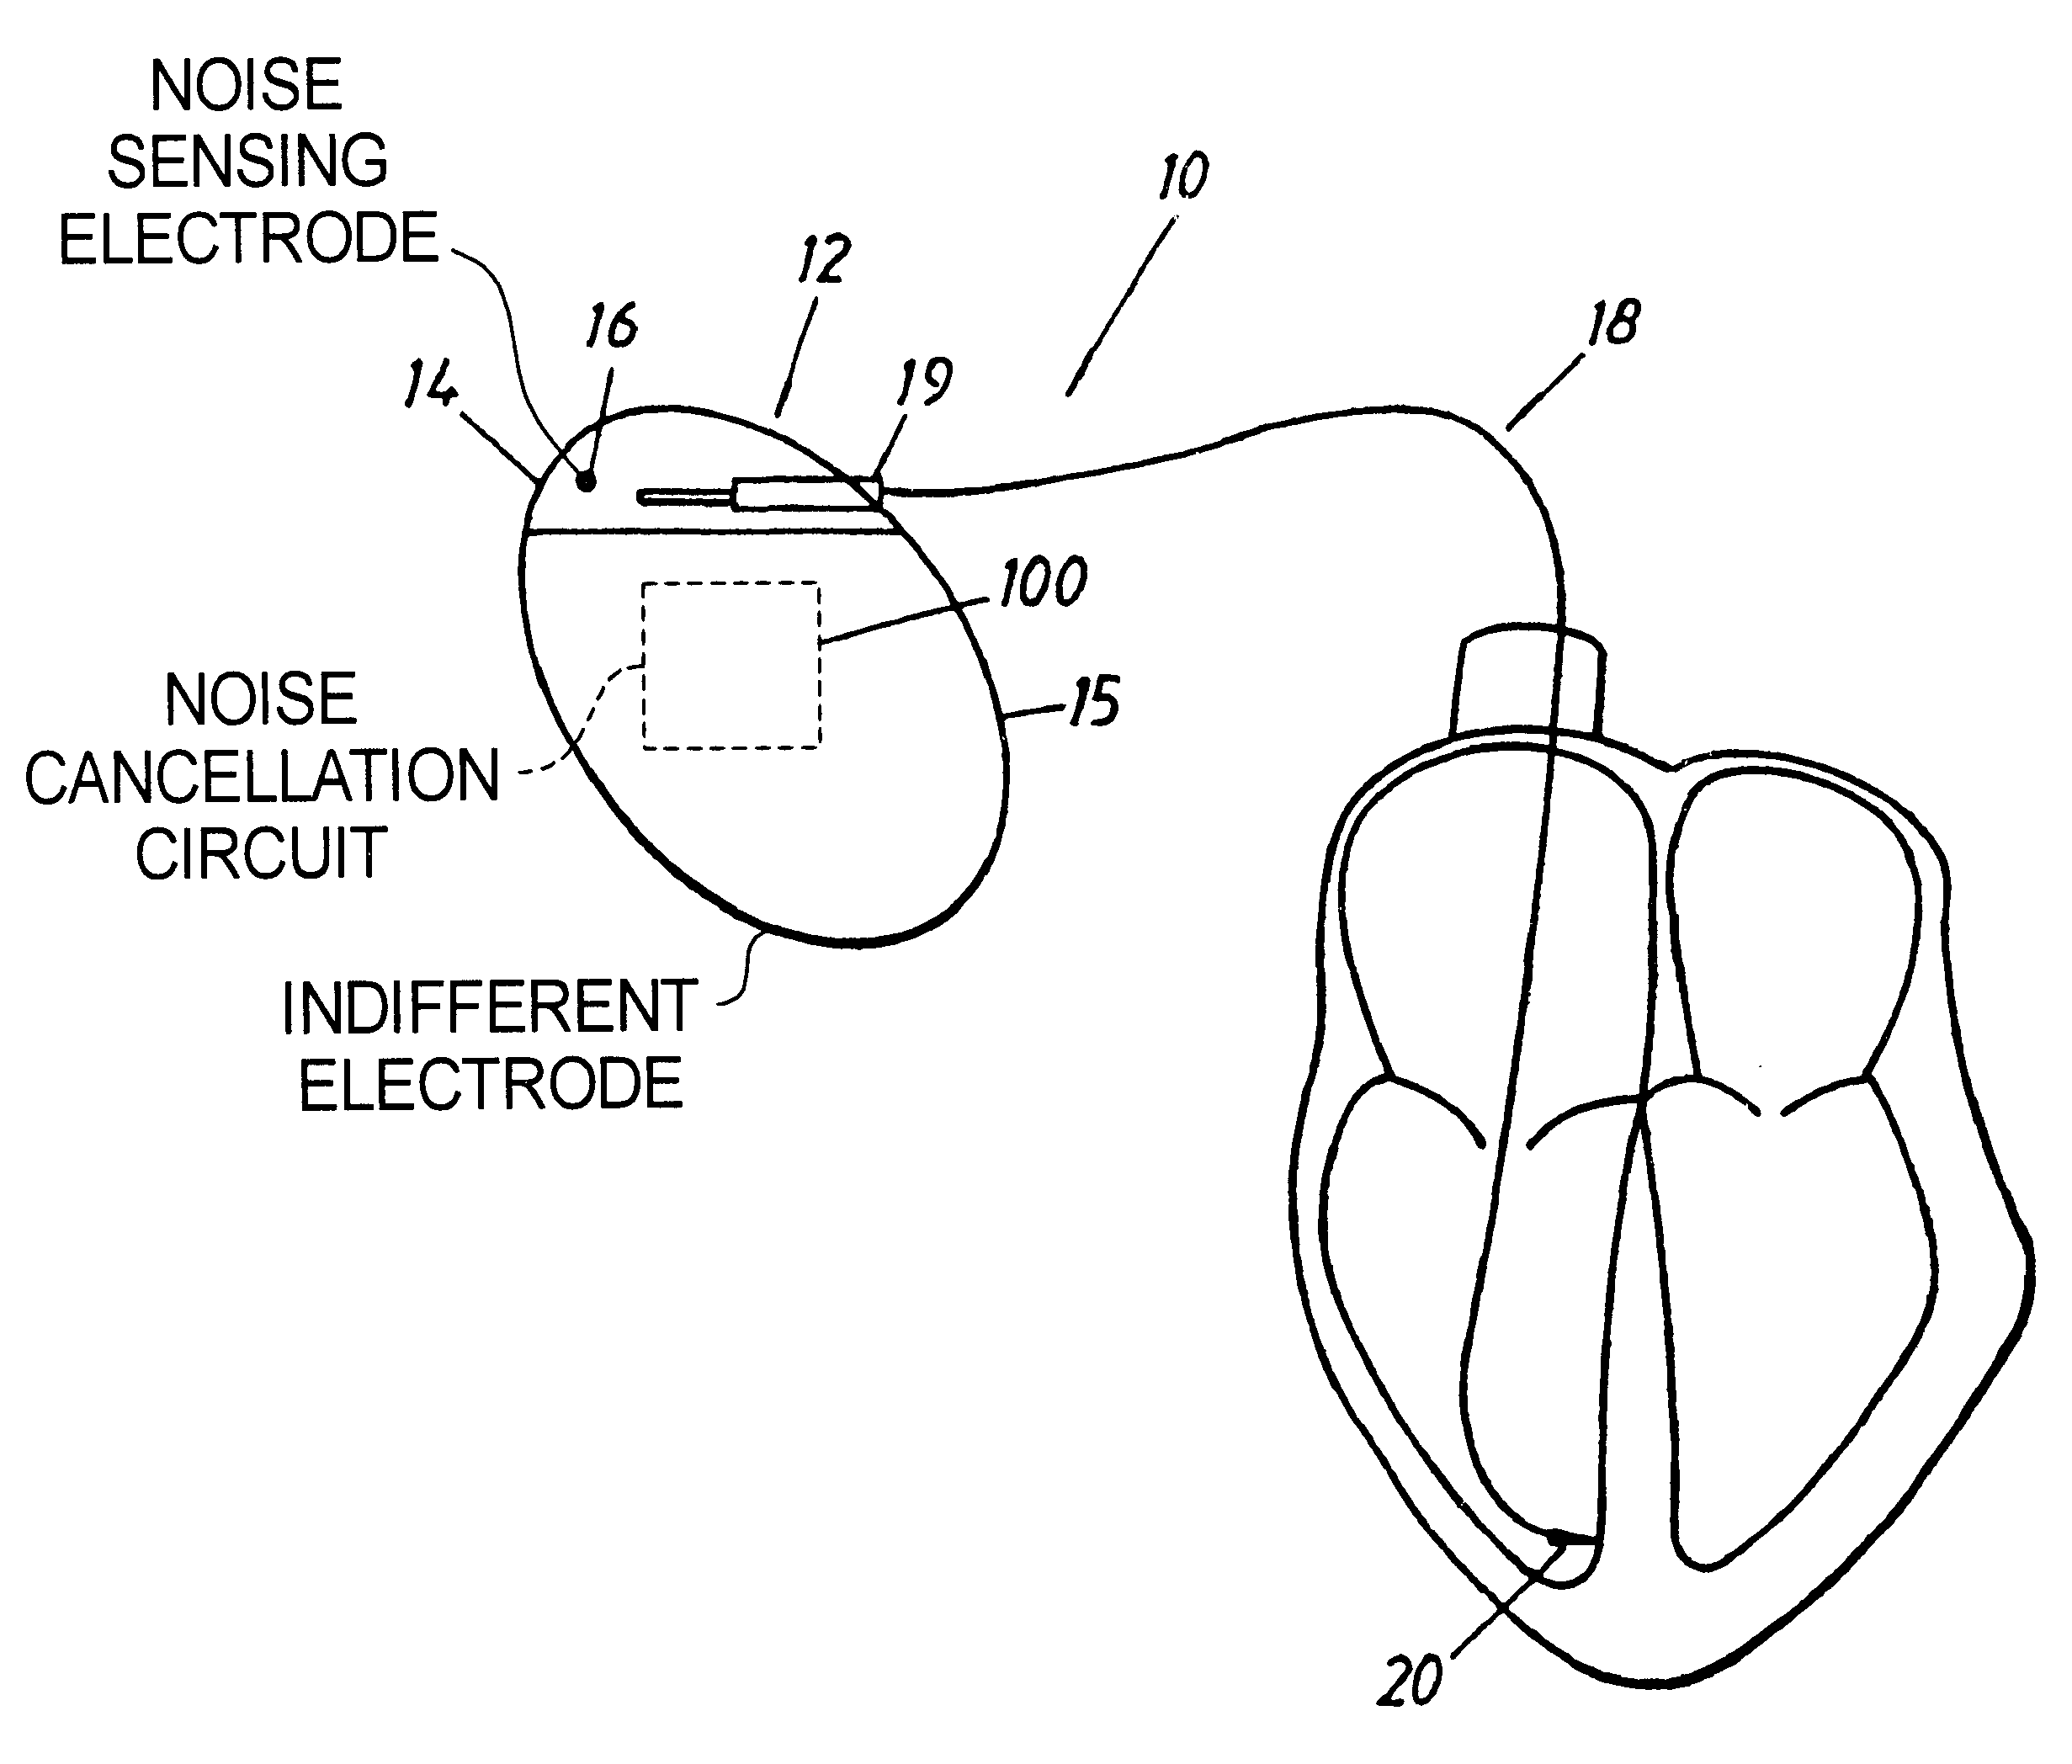 Implantable cardiac stimulator with circuitry for removing noise in sensed electrical signals